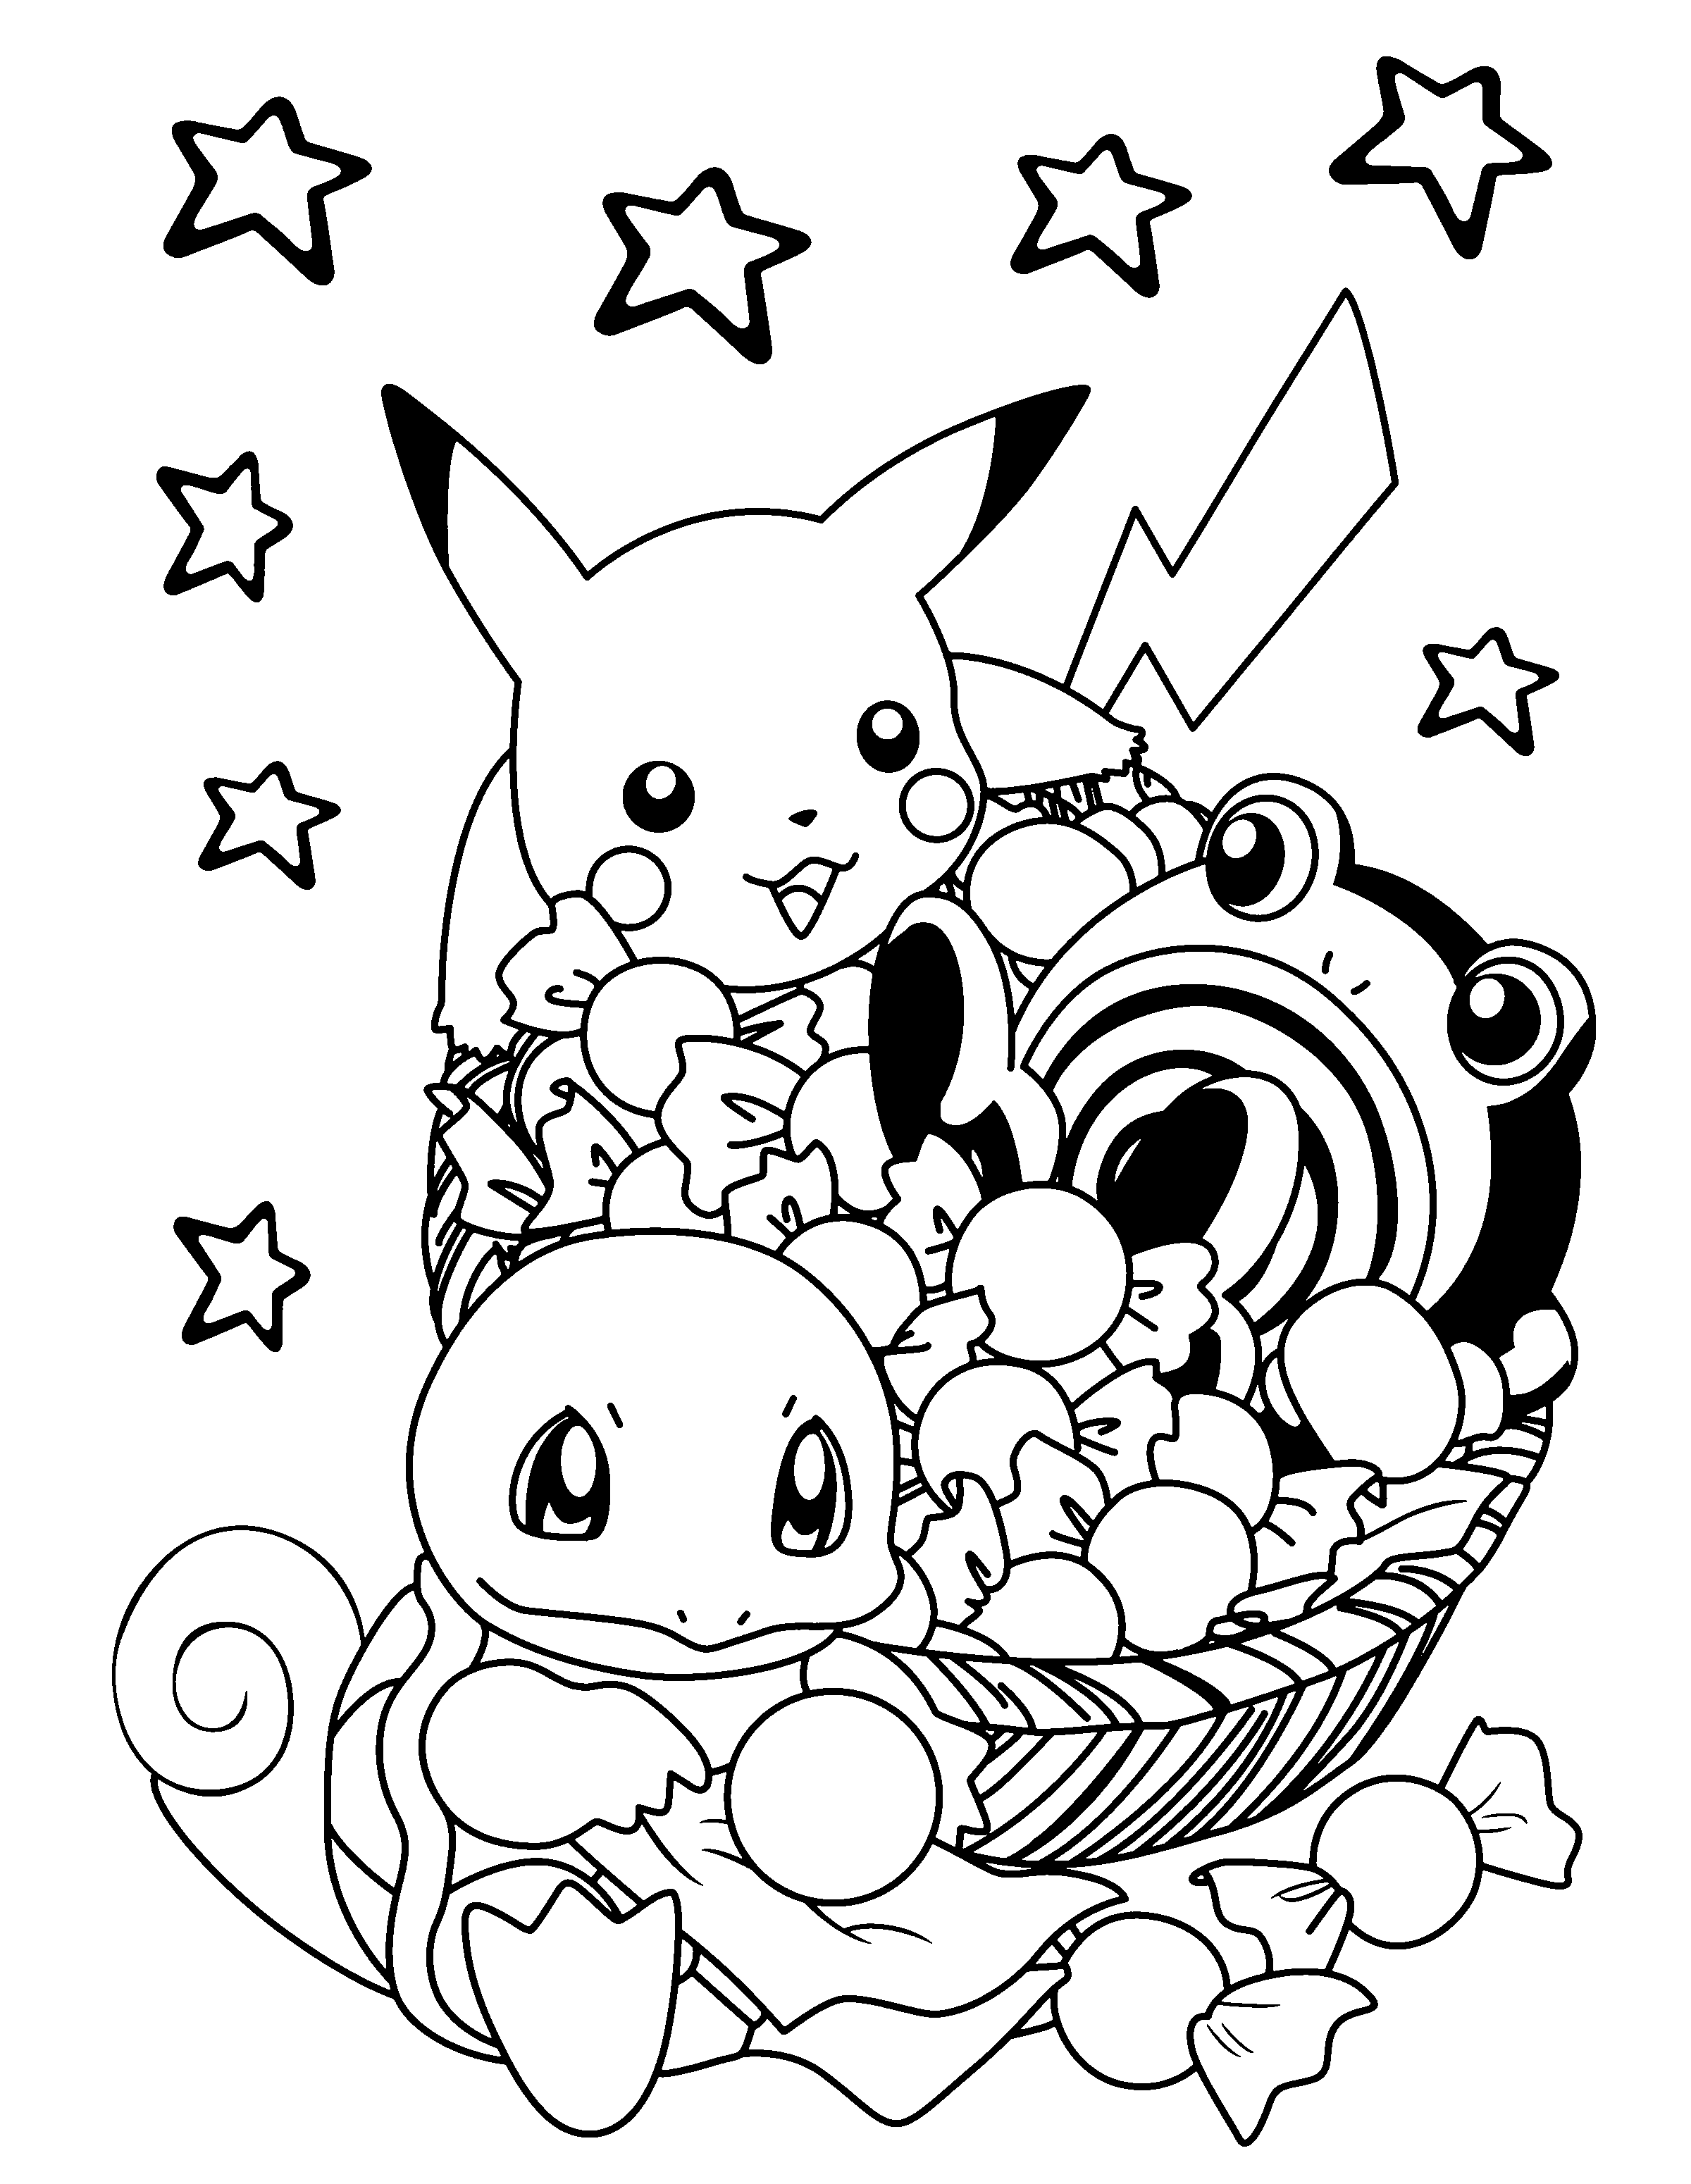 colouring pages of pokemon black and white pokemon coloring page tv series coloring page picgifscom white pokemon colouring pages and black of 